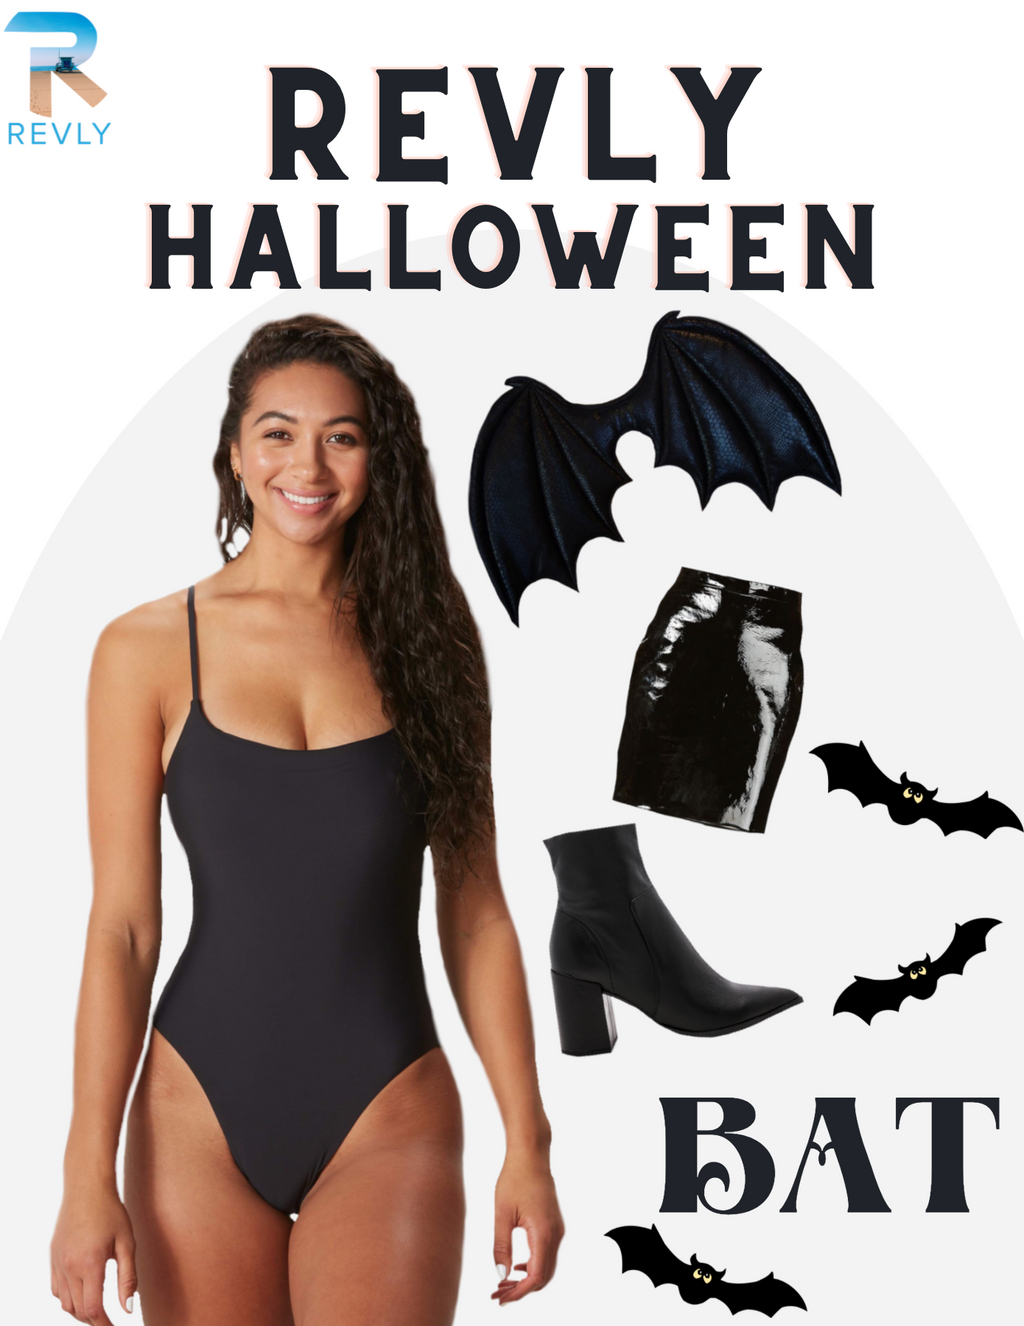 How to Turn Your Favorite REVLY Suit into a Halloween Costume